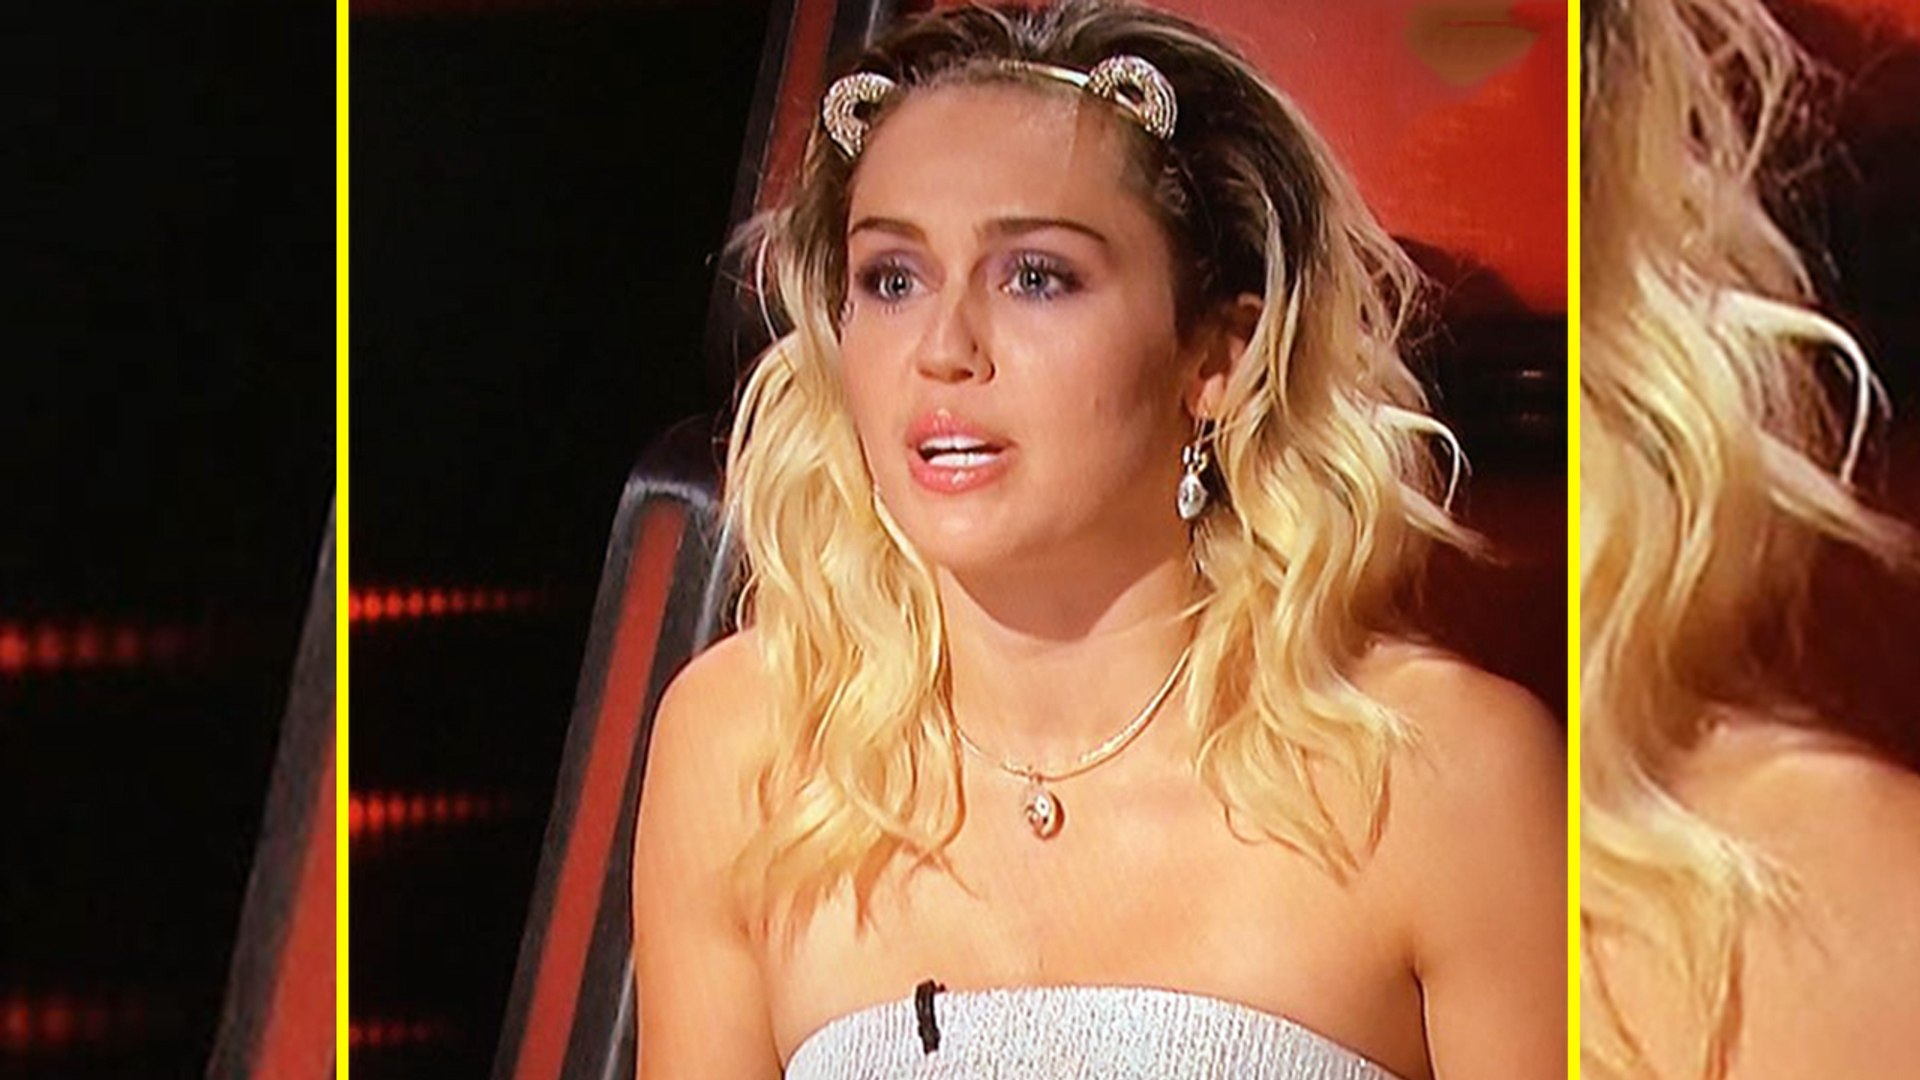 Miley Cyrus Cries On 'The Voice' During Performance